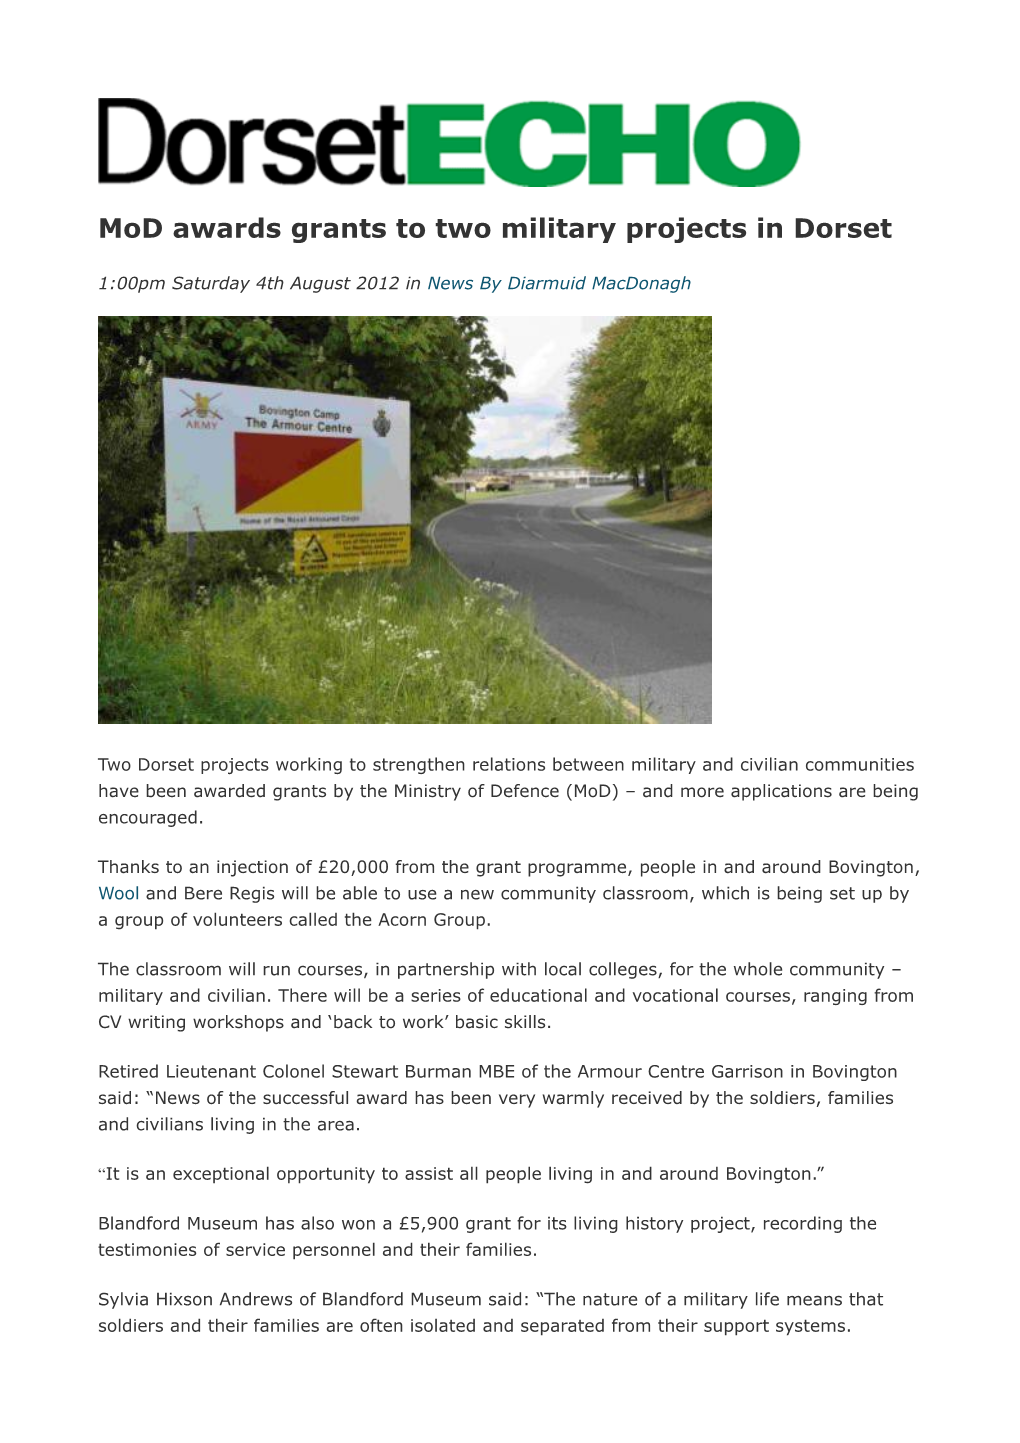 Mod Awards Grants to Two Military Projects in Dorset